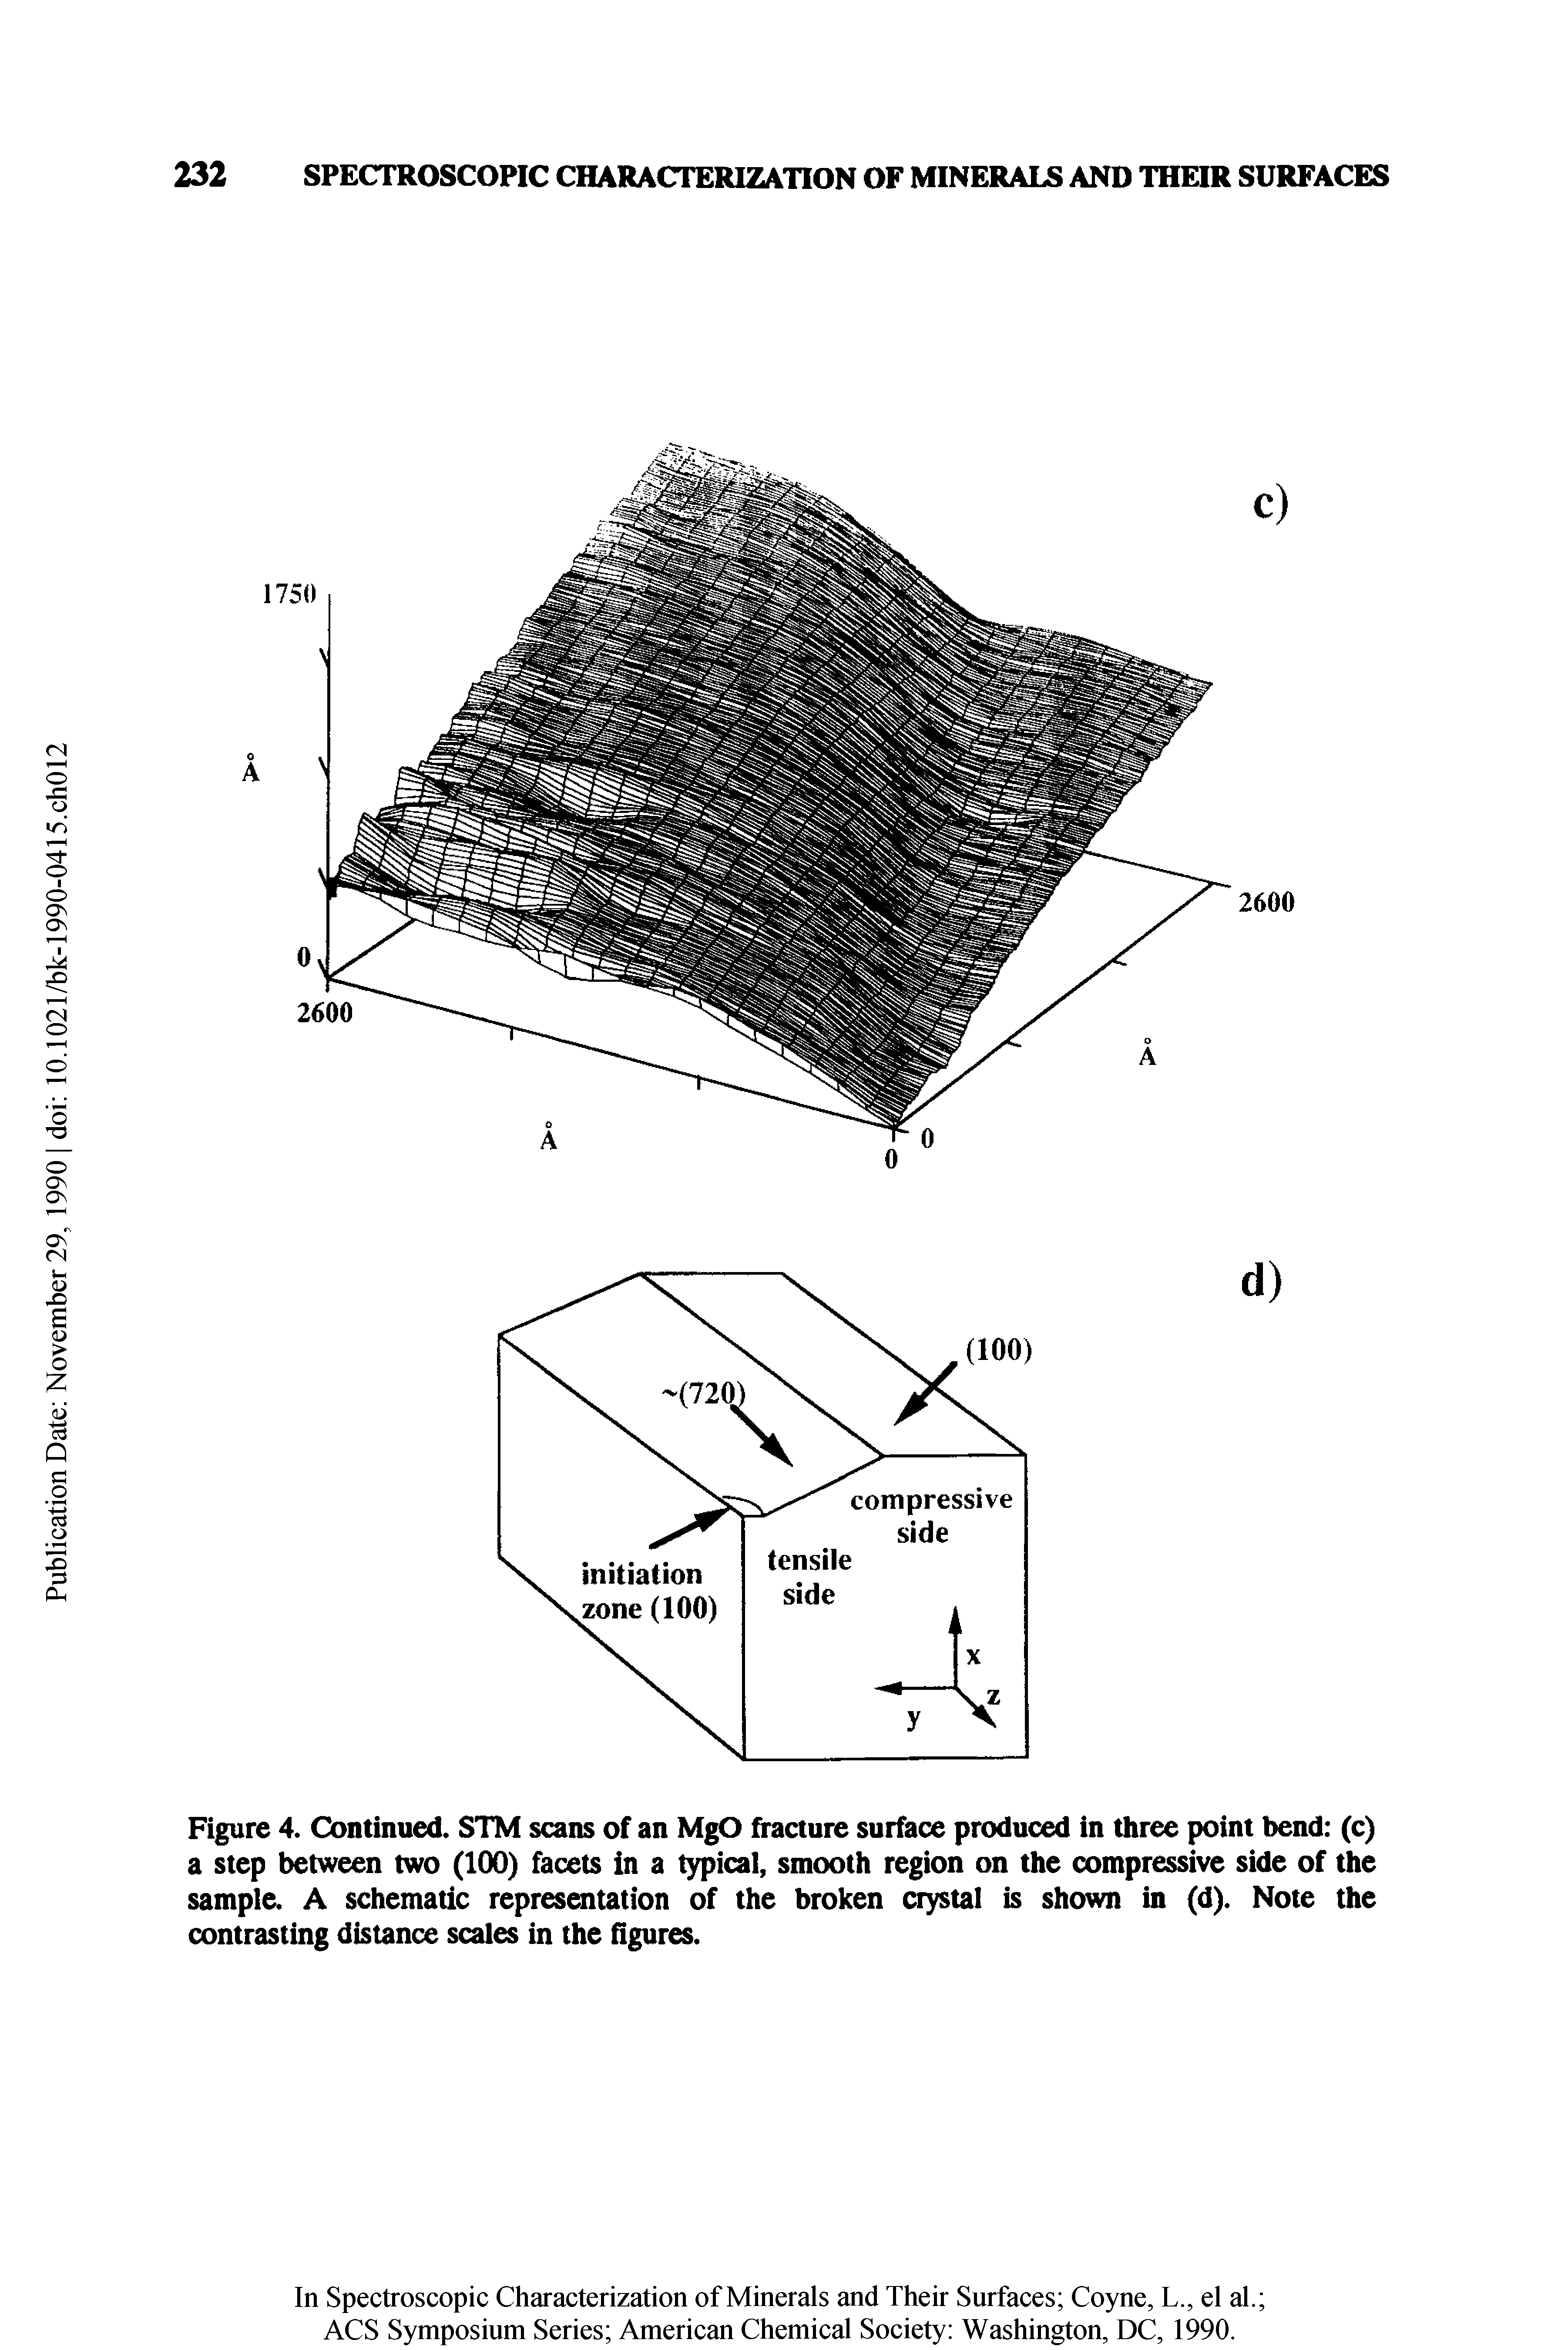 Figure 4. Continued. STM scans of an MgO fracture surface produced in three point bend (c) a step between two (100) facets in a typical, smooth region on the compressive side of the sample. A schematic representation of the broken crystal is shown in (d). Note the contrasting distance scales in the figures.